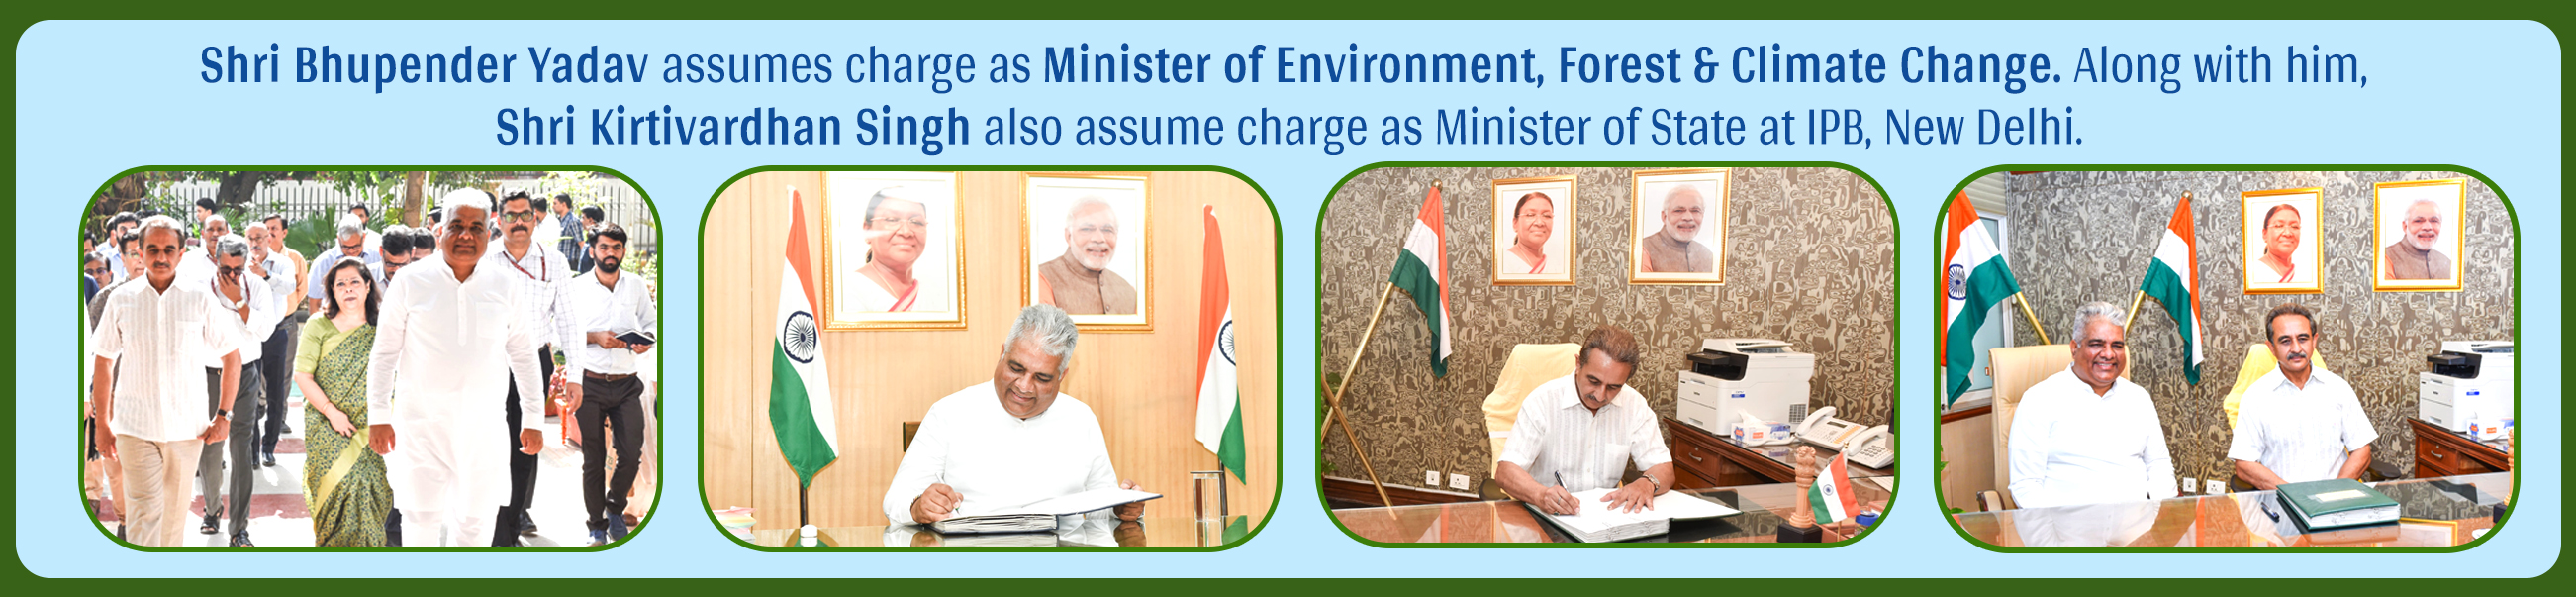 HMEFCC & HMOEFCC assumes charge as Ministers